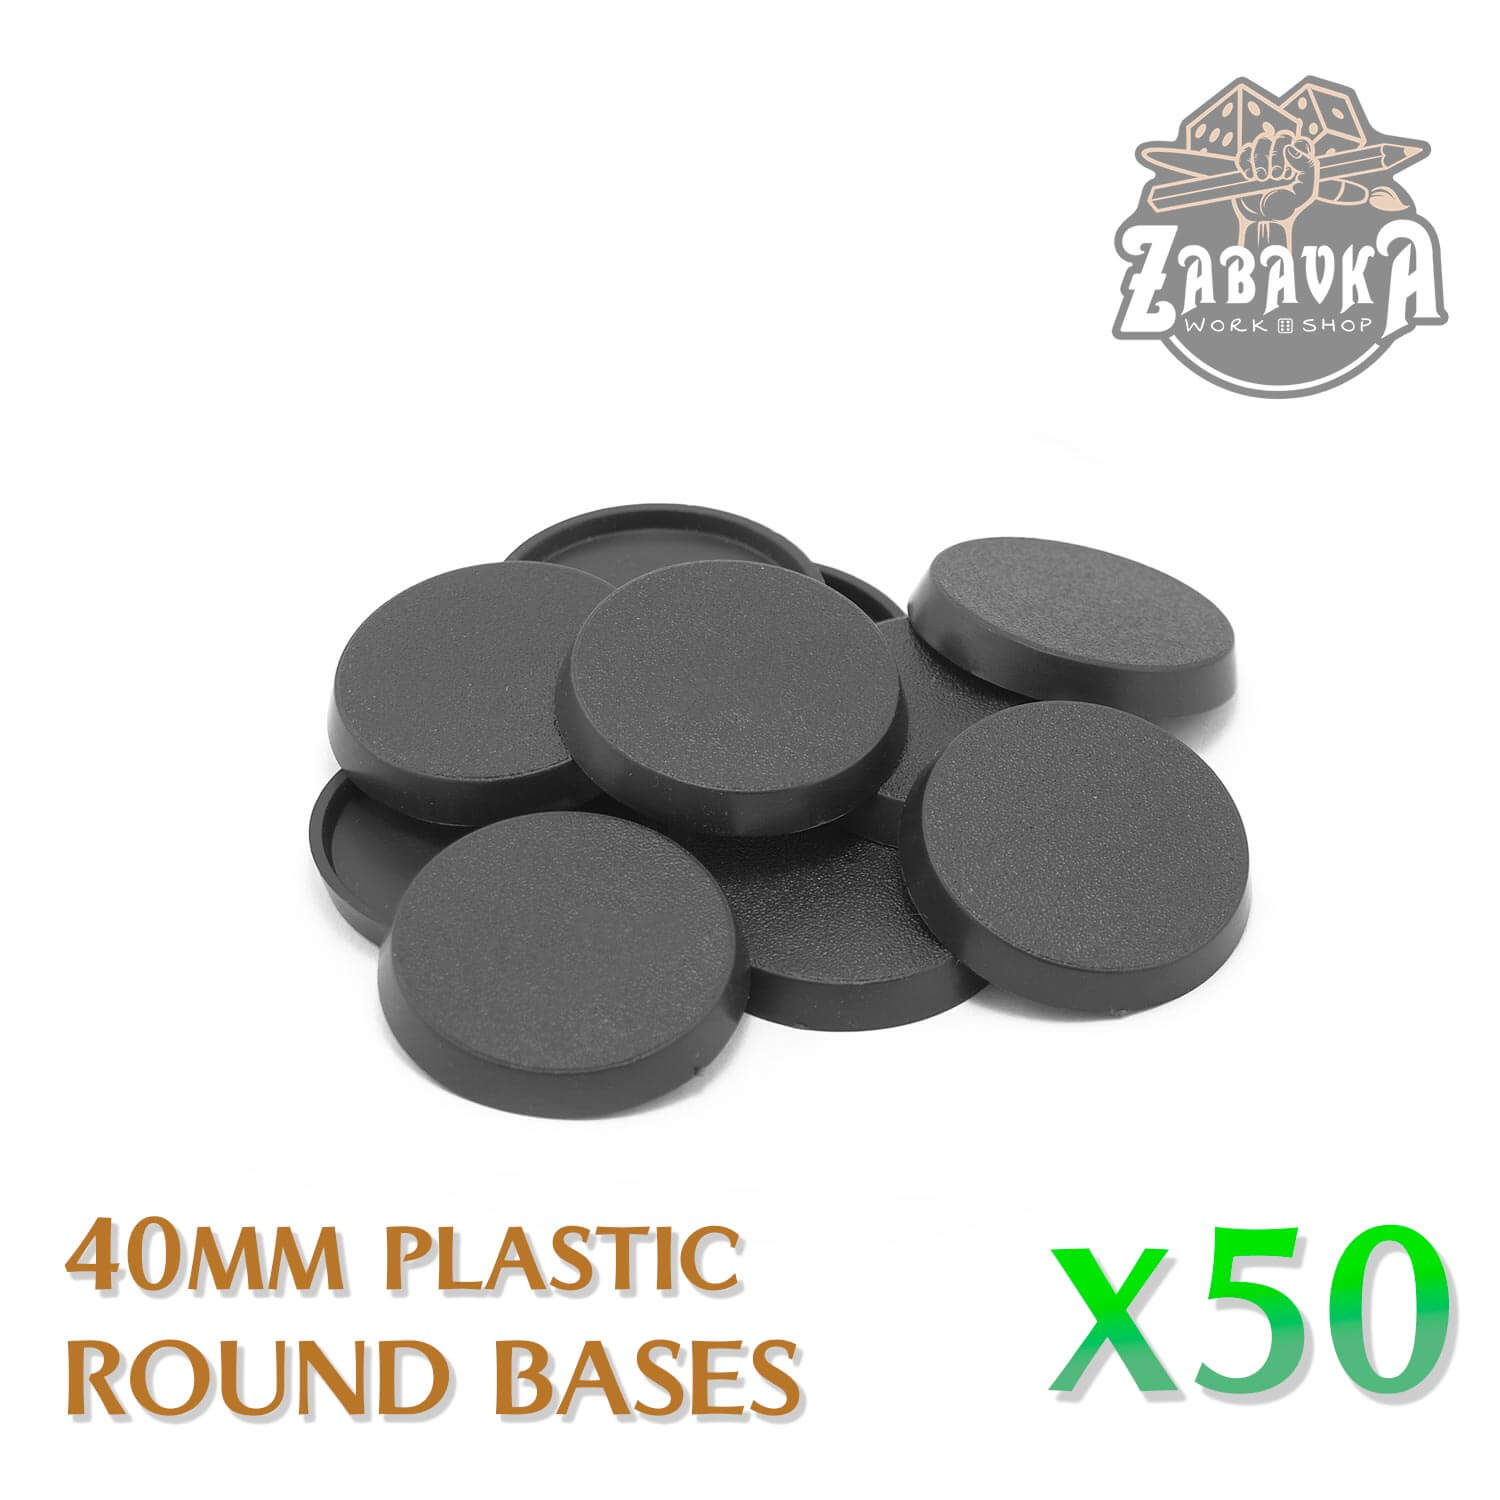 50 Chessex 25mm Black Plastic Round Slotted Bases #08607F for RPG Miniatures 